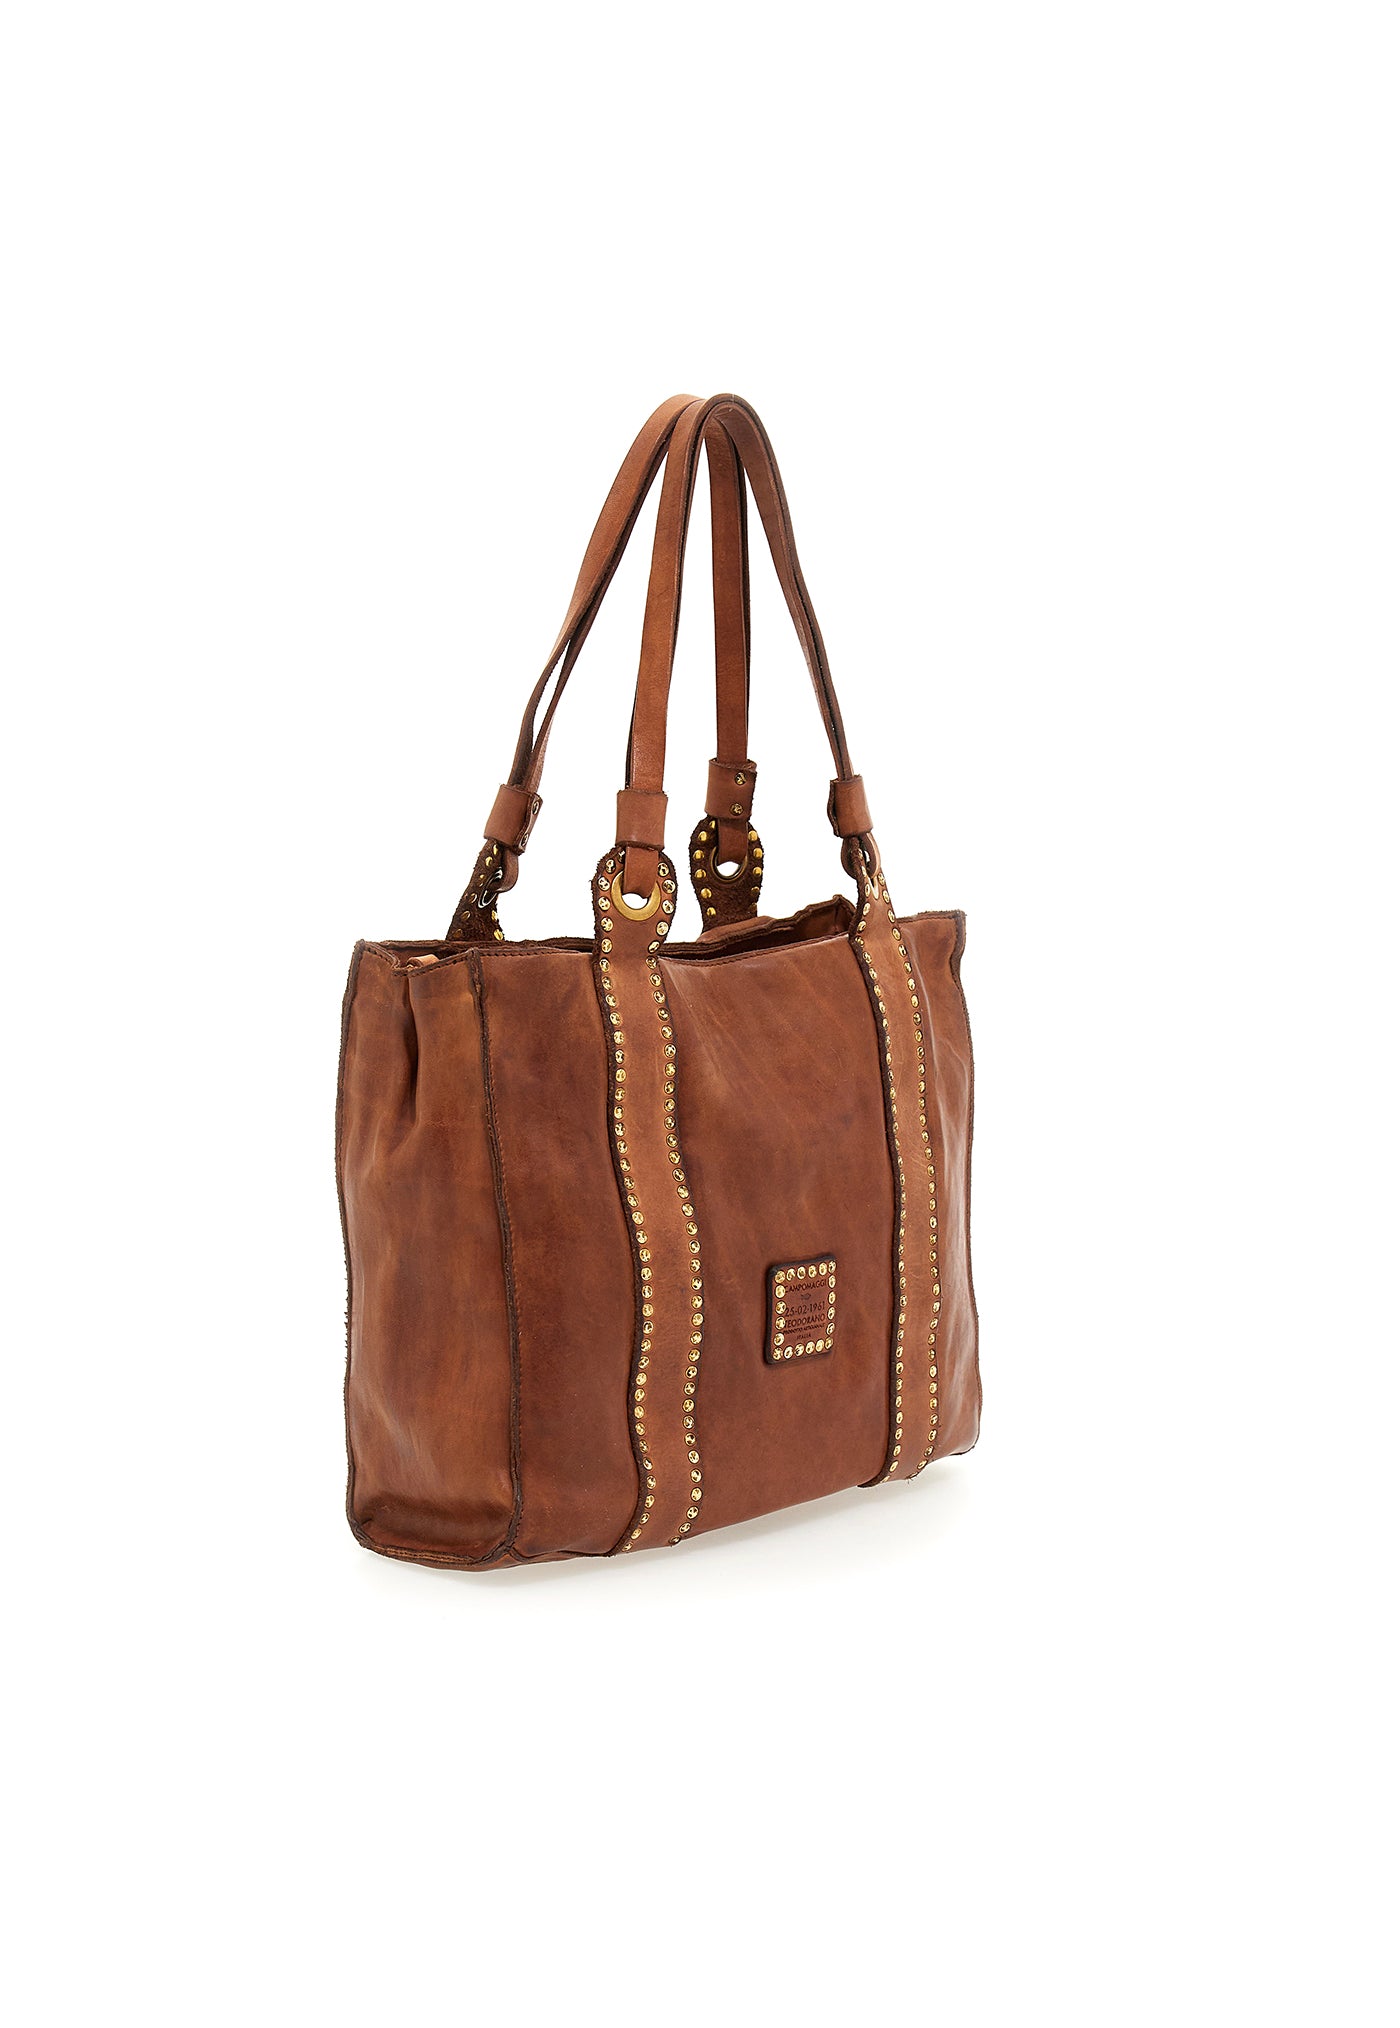 Mix Studs Shopping Bag - Cognac sold by Angel Divine